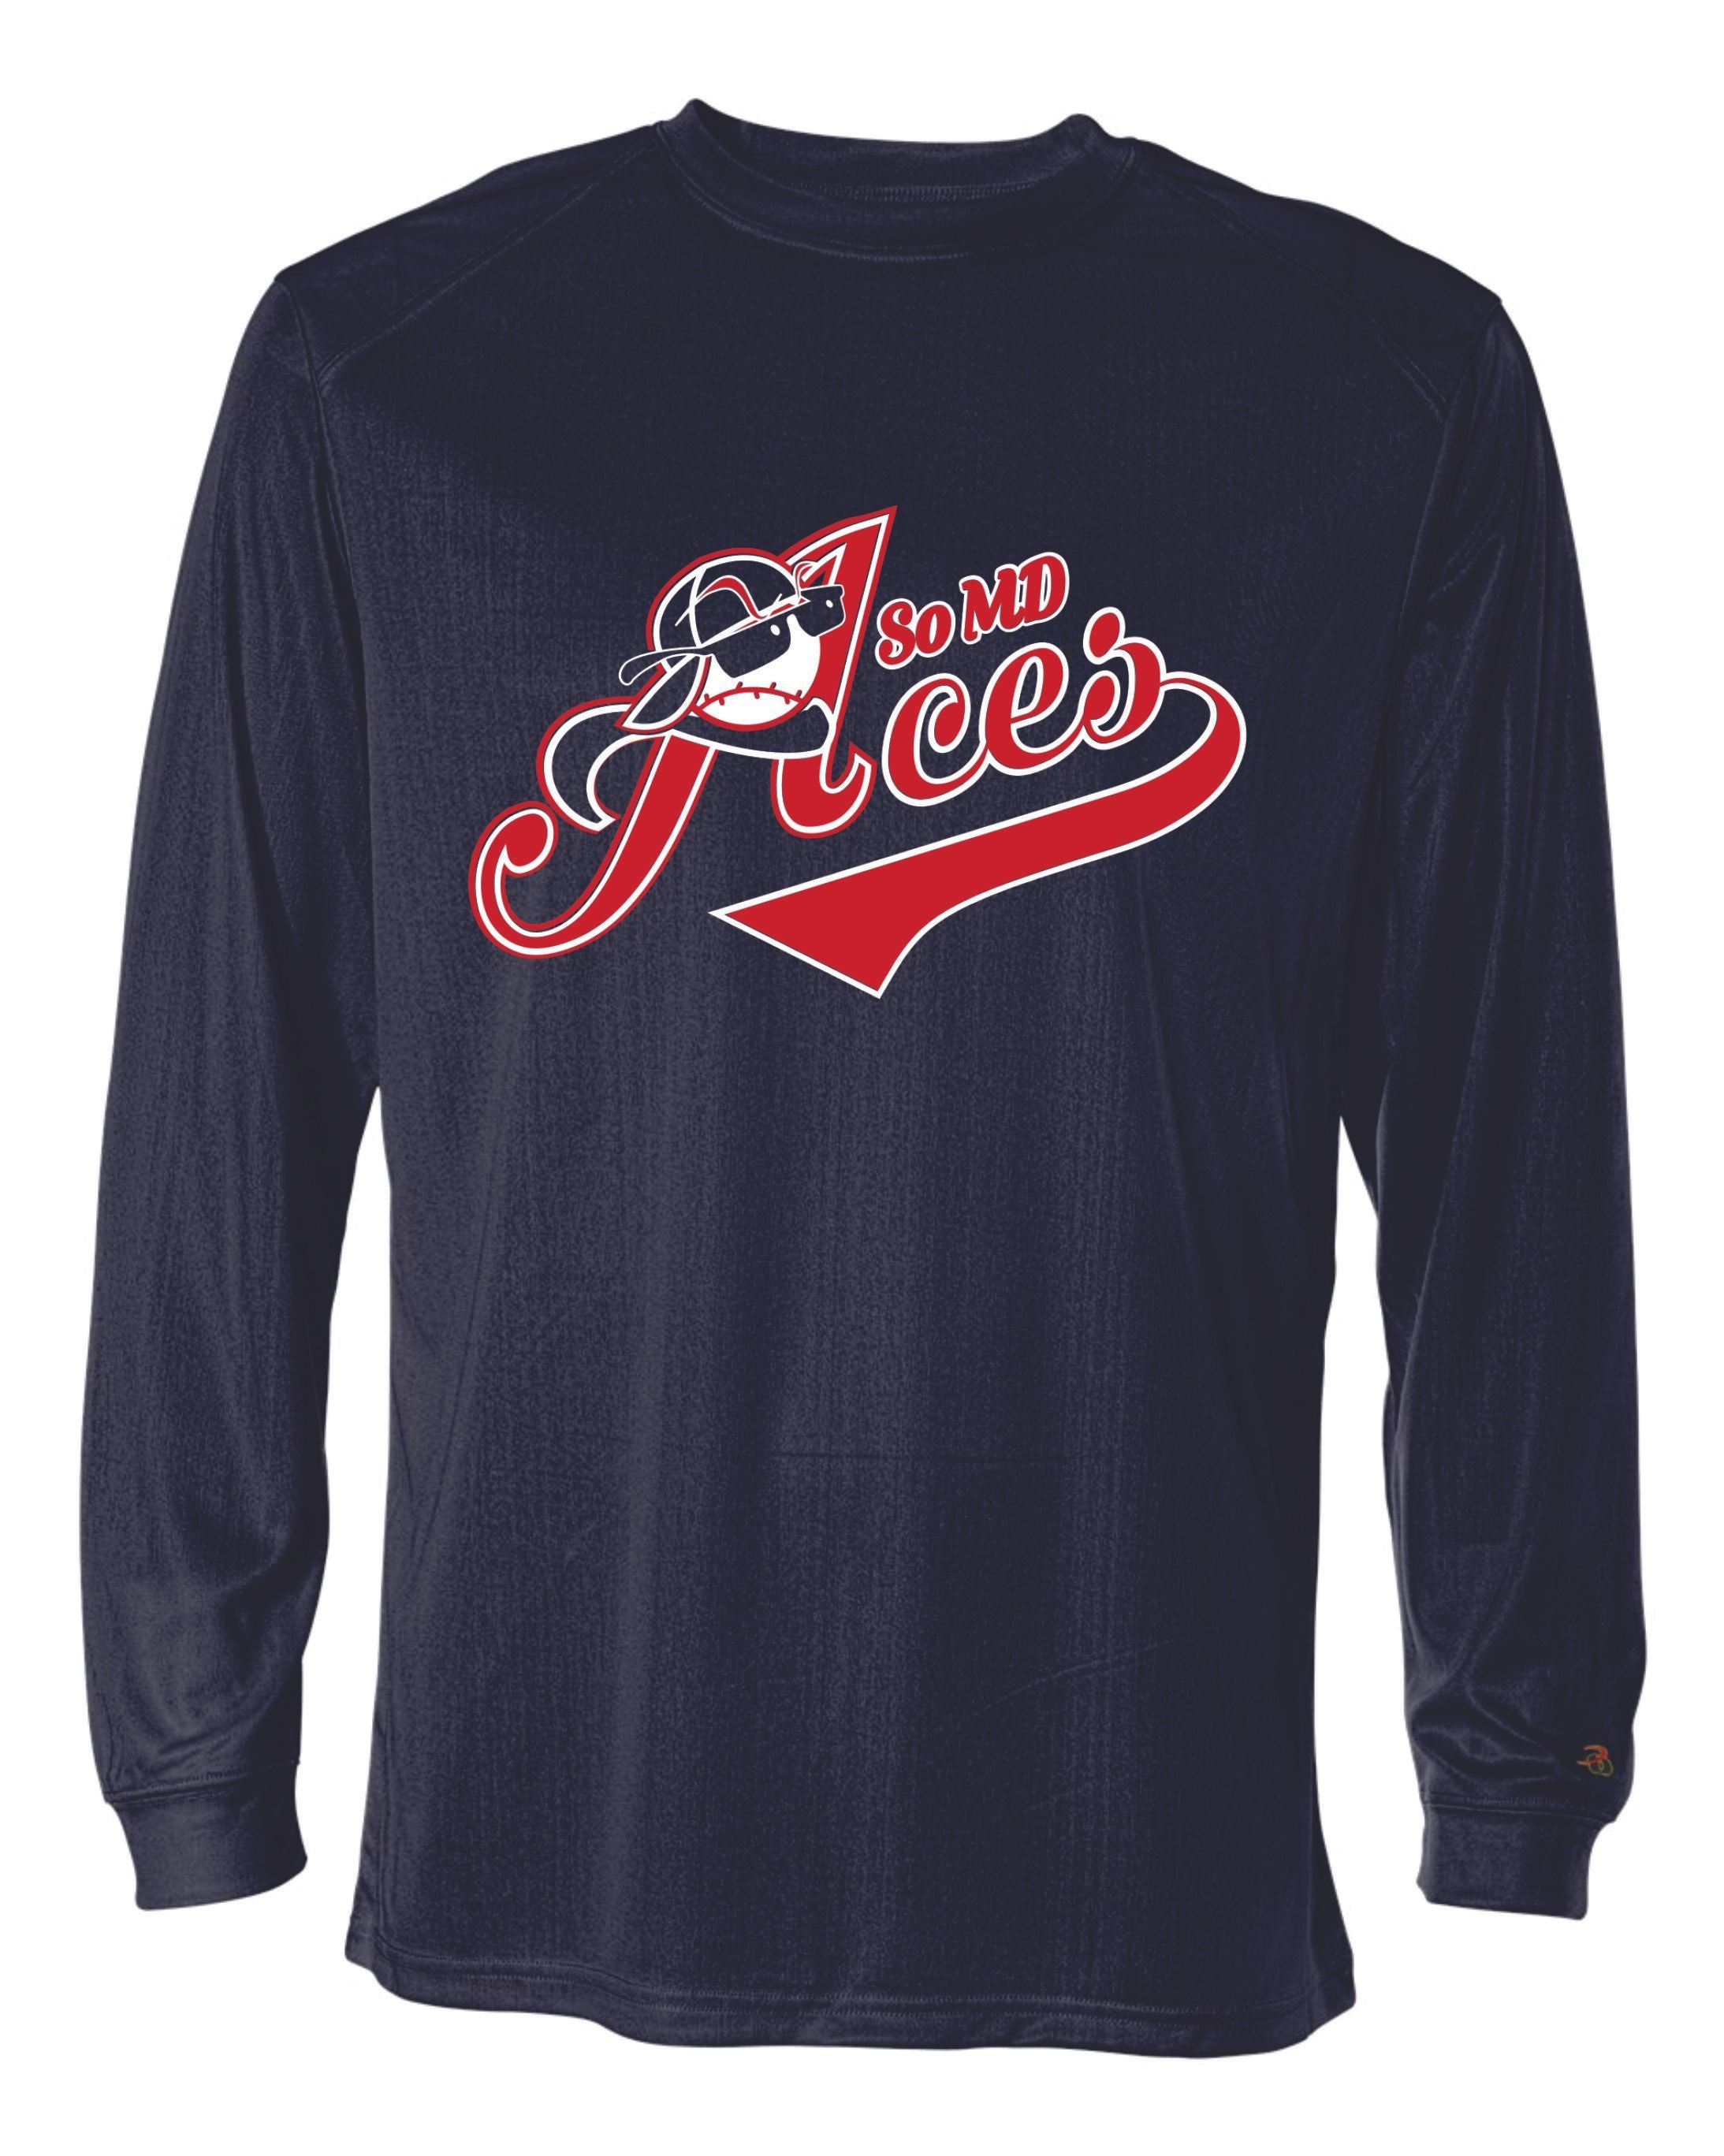 Aces Long Sleeve Badger Dri Fit Shirt YOUTH